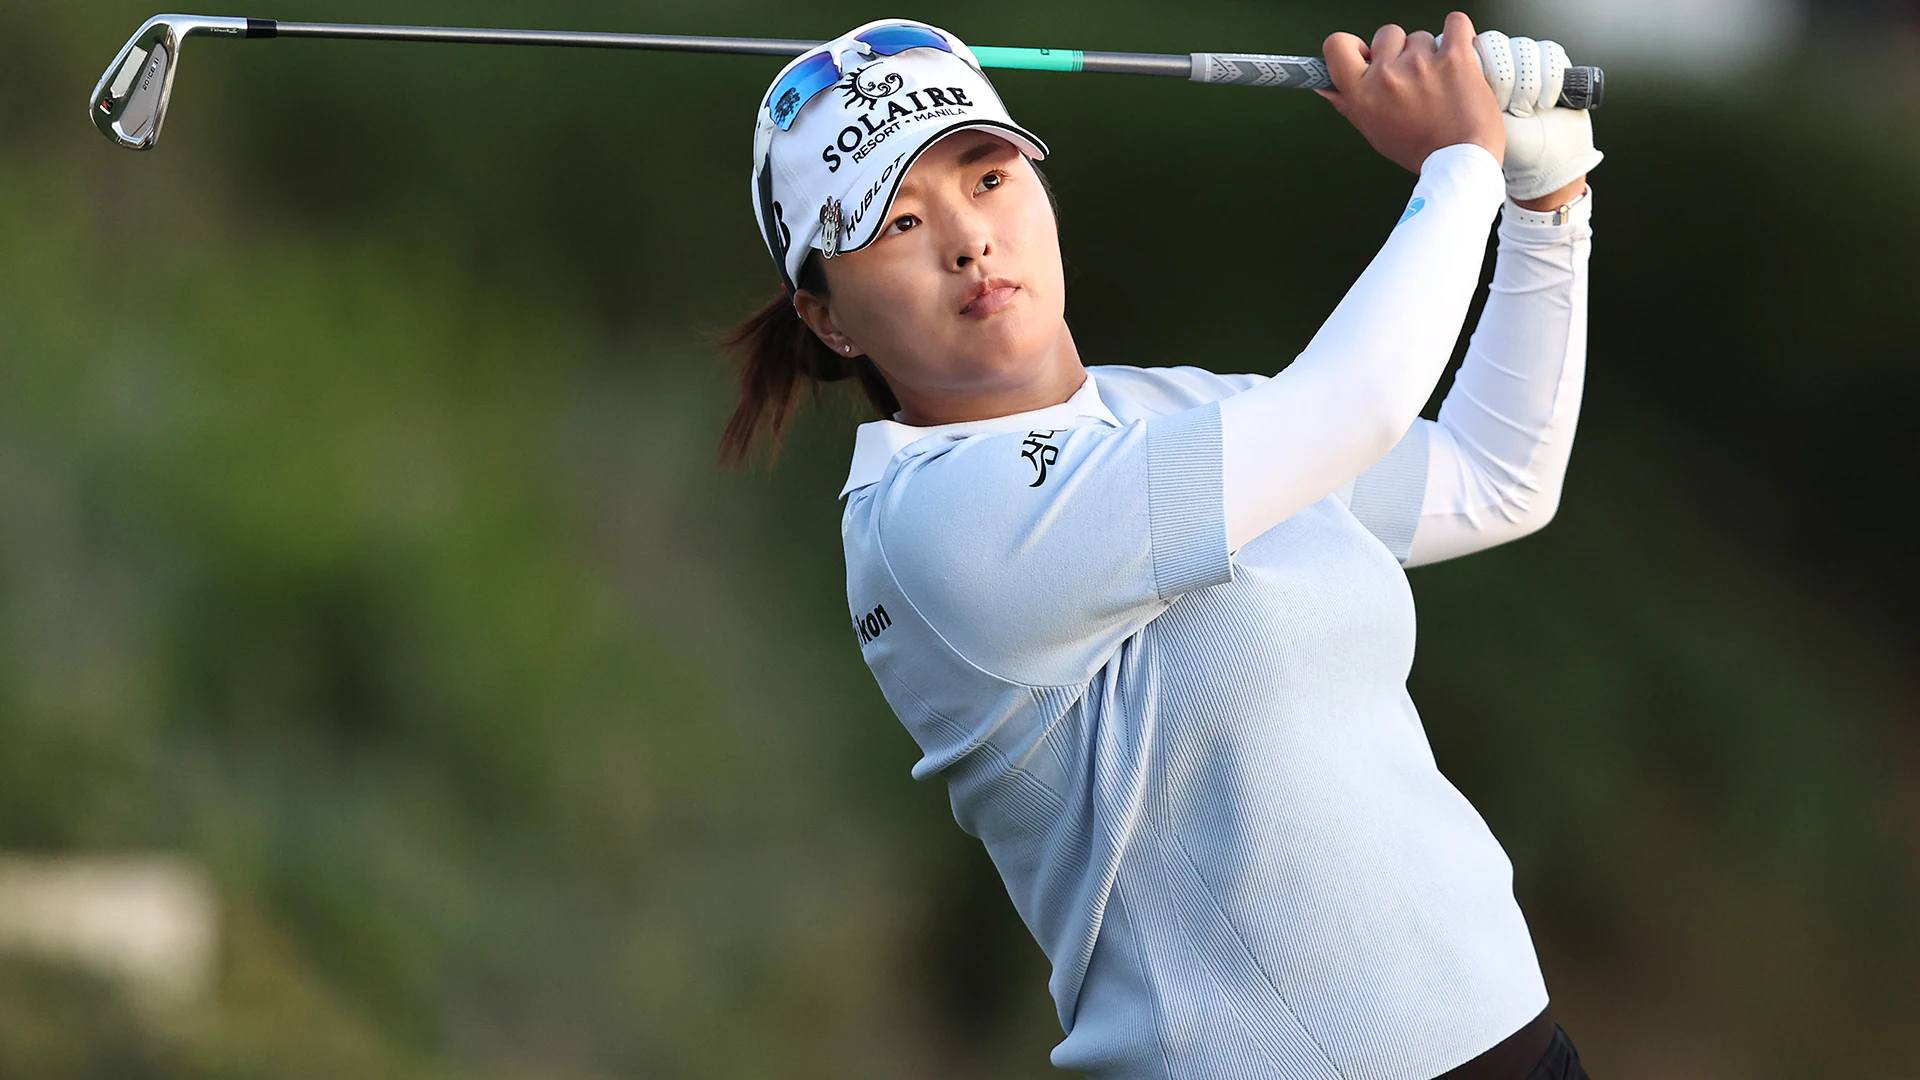 Jin Young Ko preparing for major tests, but taking it week-by-week first